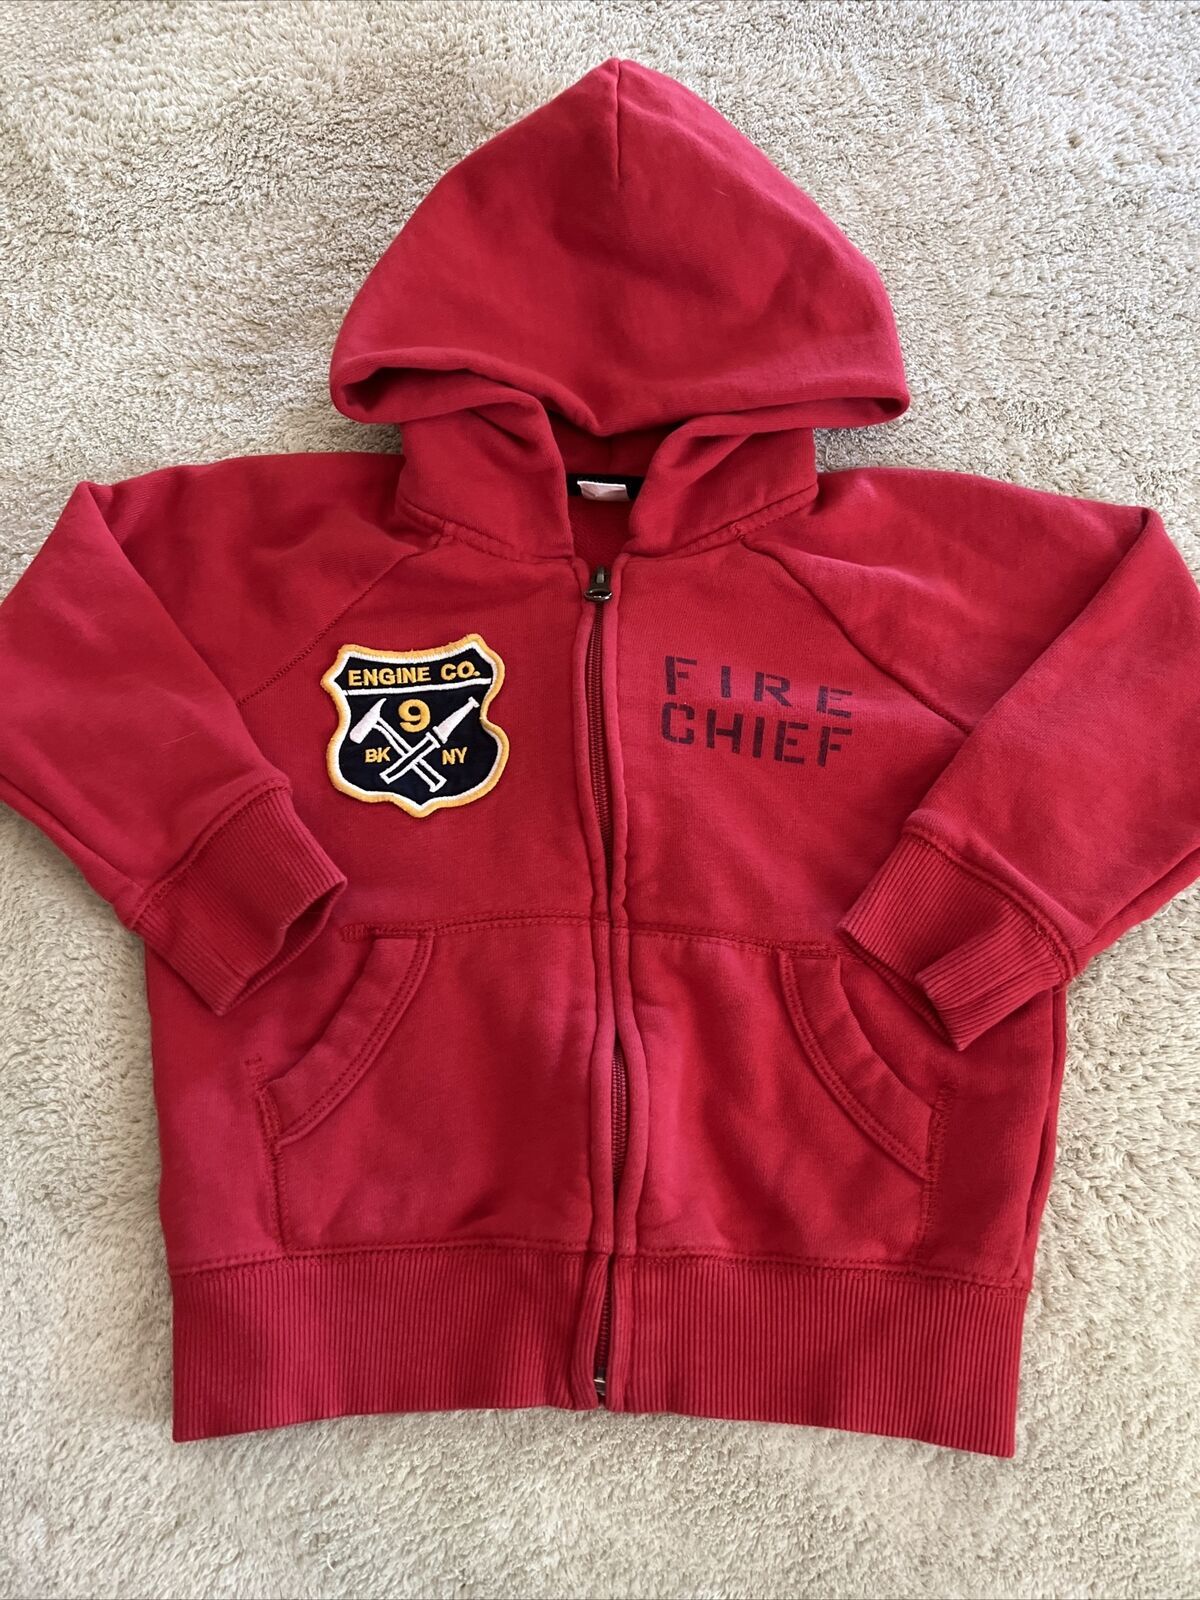 Baby Gap Boys Red Fire Chief NY Truck Embroidered Full Zip Long Sleeve Hoodie 4 - $14.70